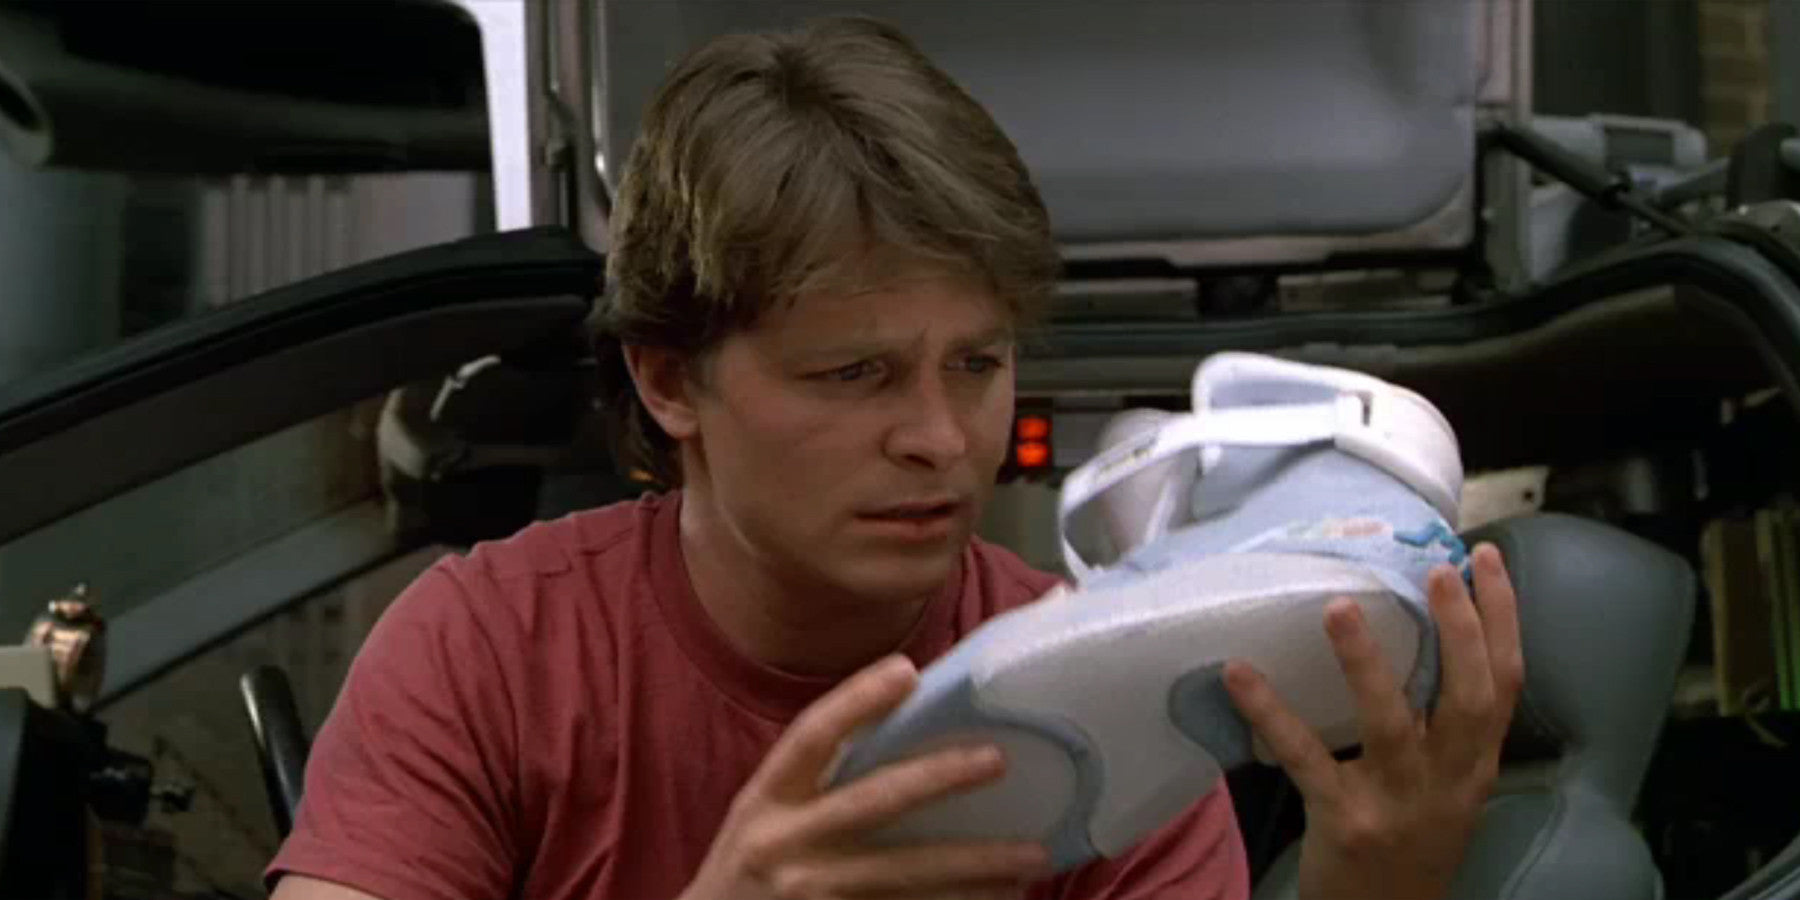 tinker hatfield back to the future